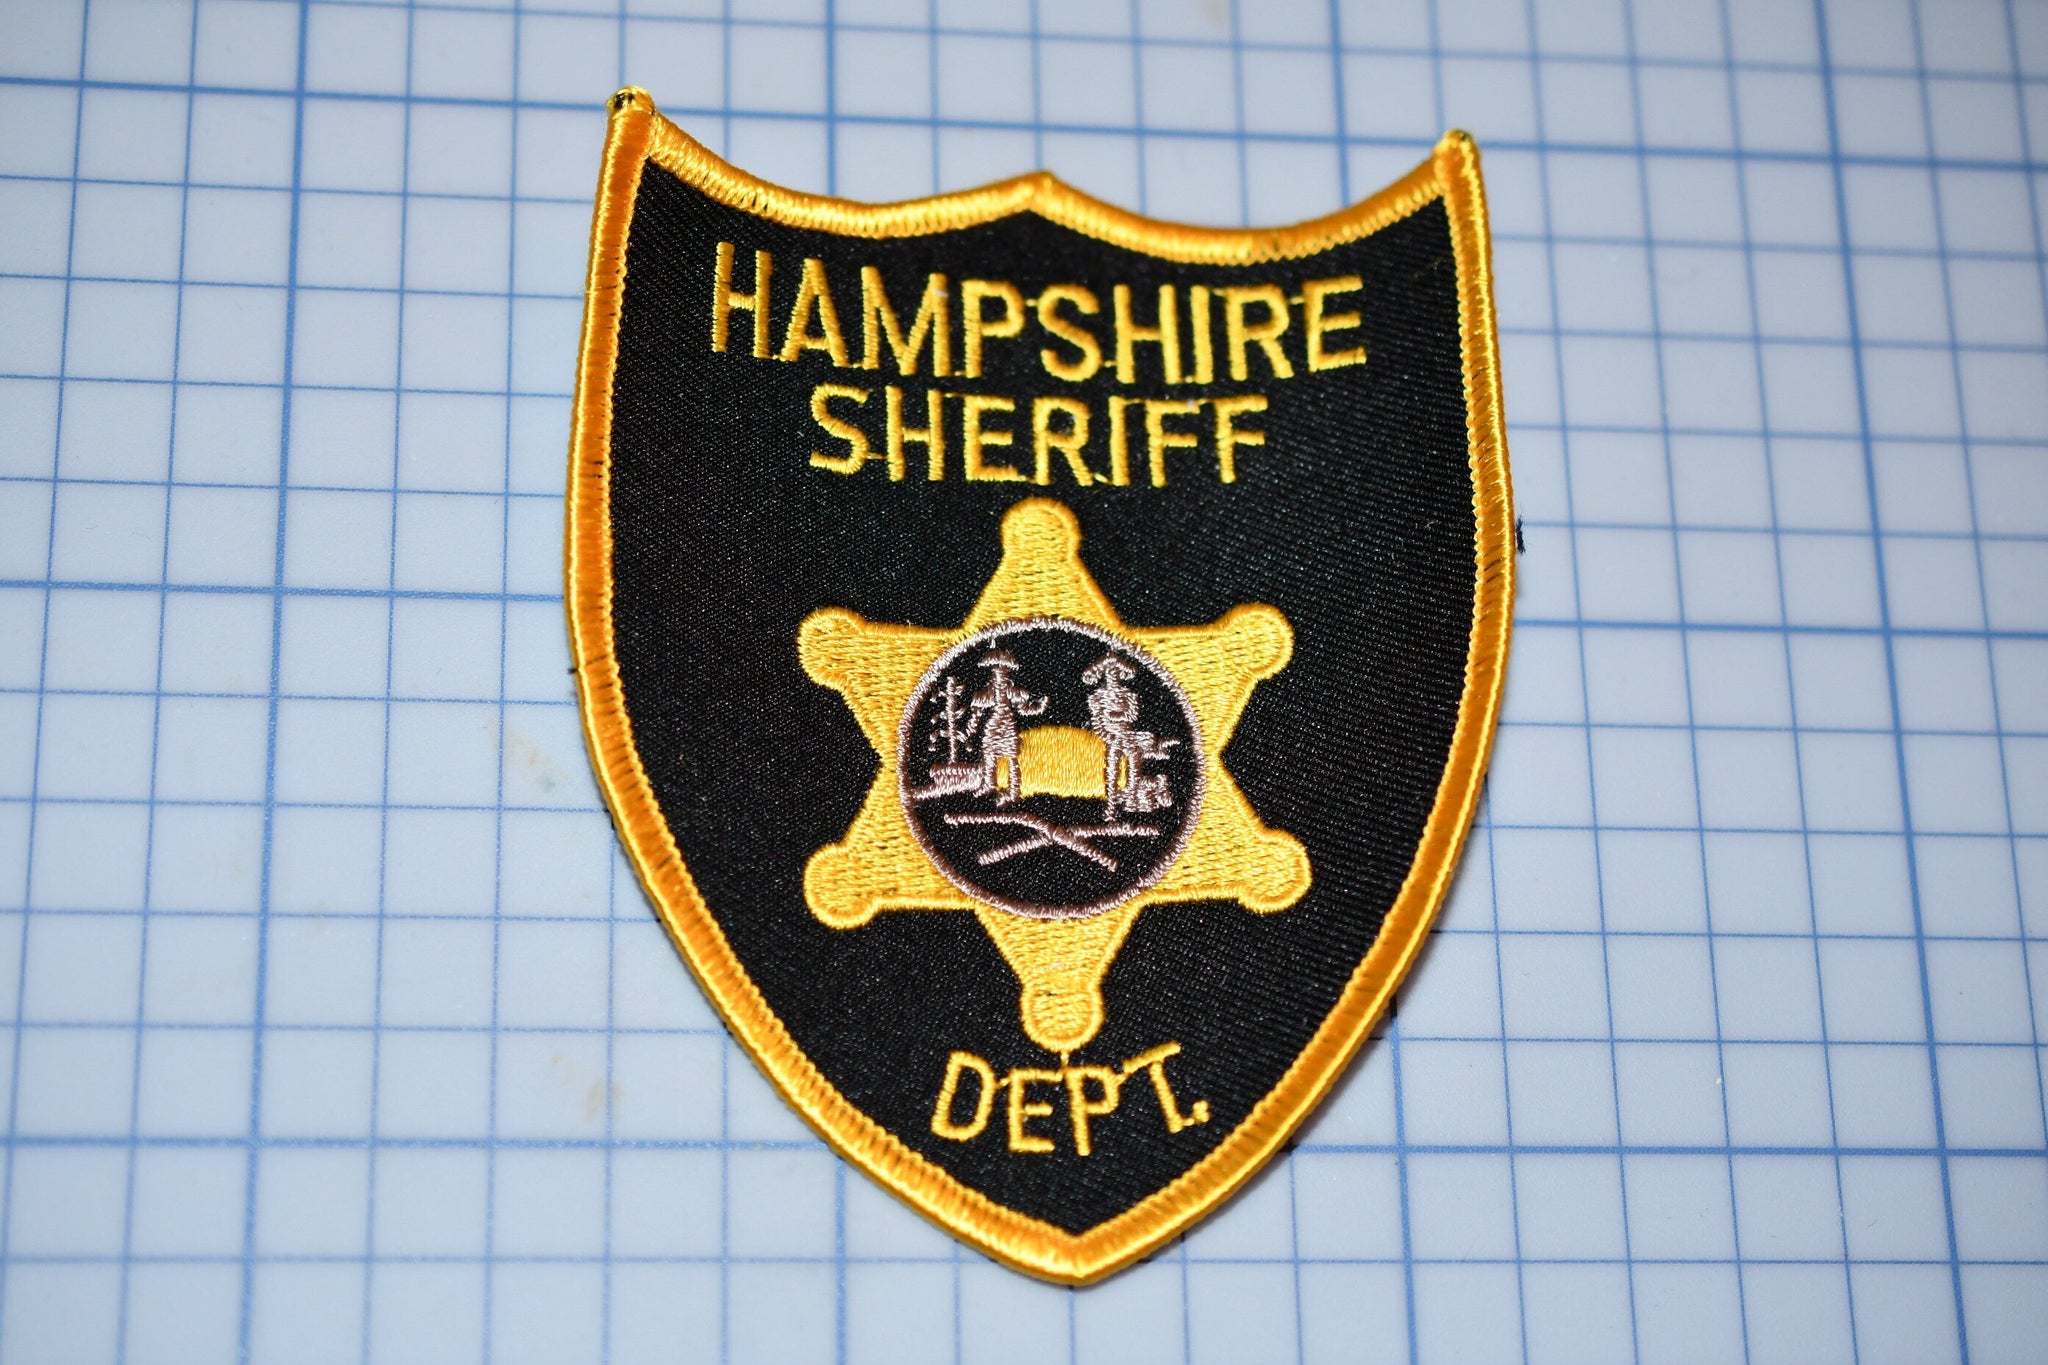 Hampshire West Virginia Sheriff Patch (S3-276)